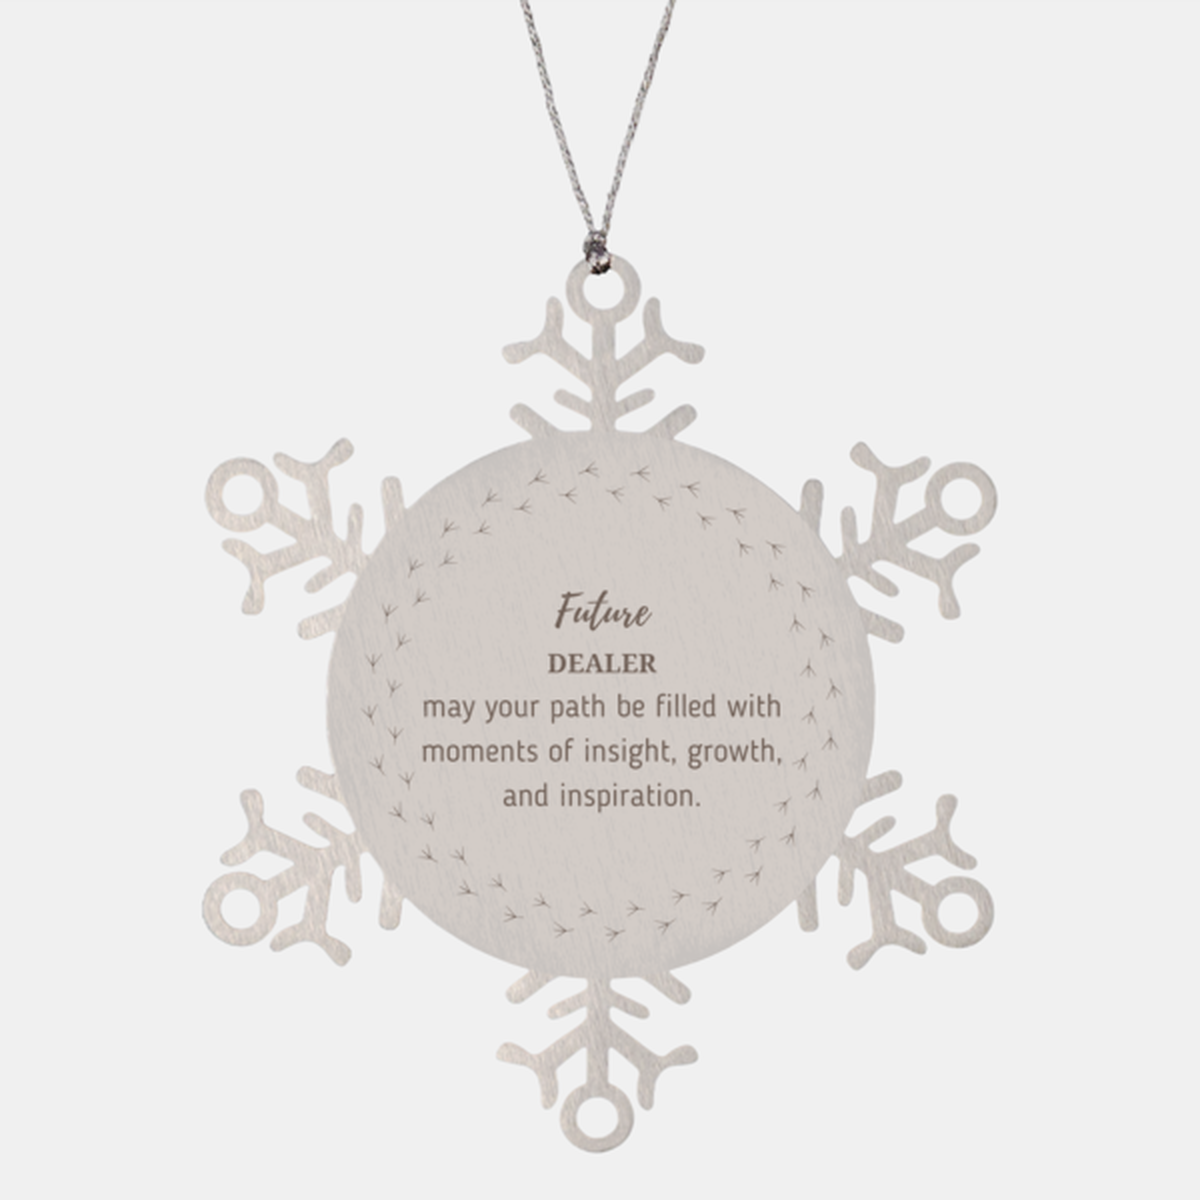 Future Dealer Gifts, May your path be filled with moments of insight, Graduation Gifts for New Dealer, Christmas Unique Snowflake Ornament For Men, Women, Friends